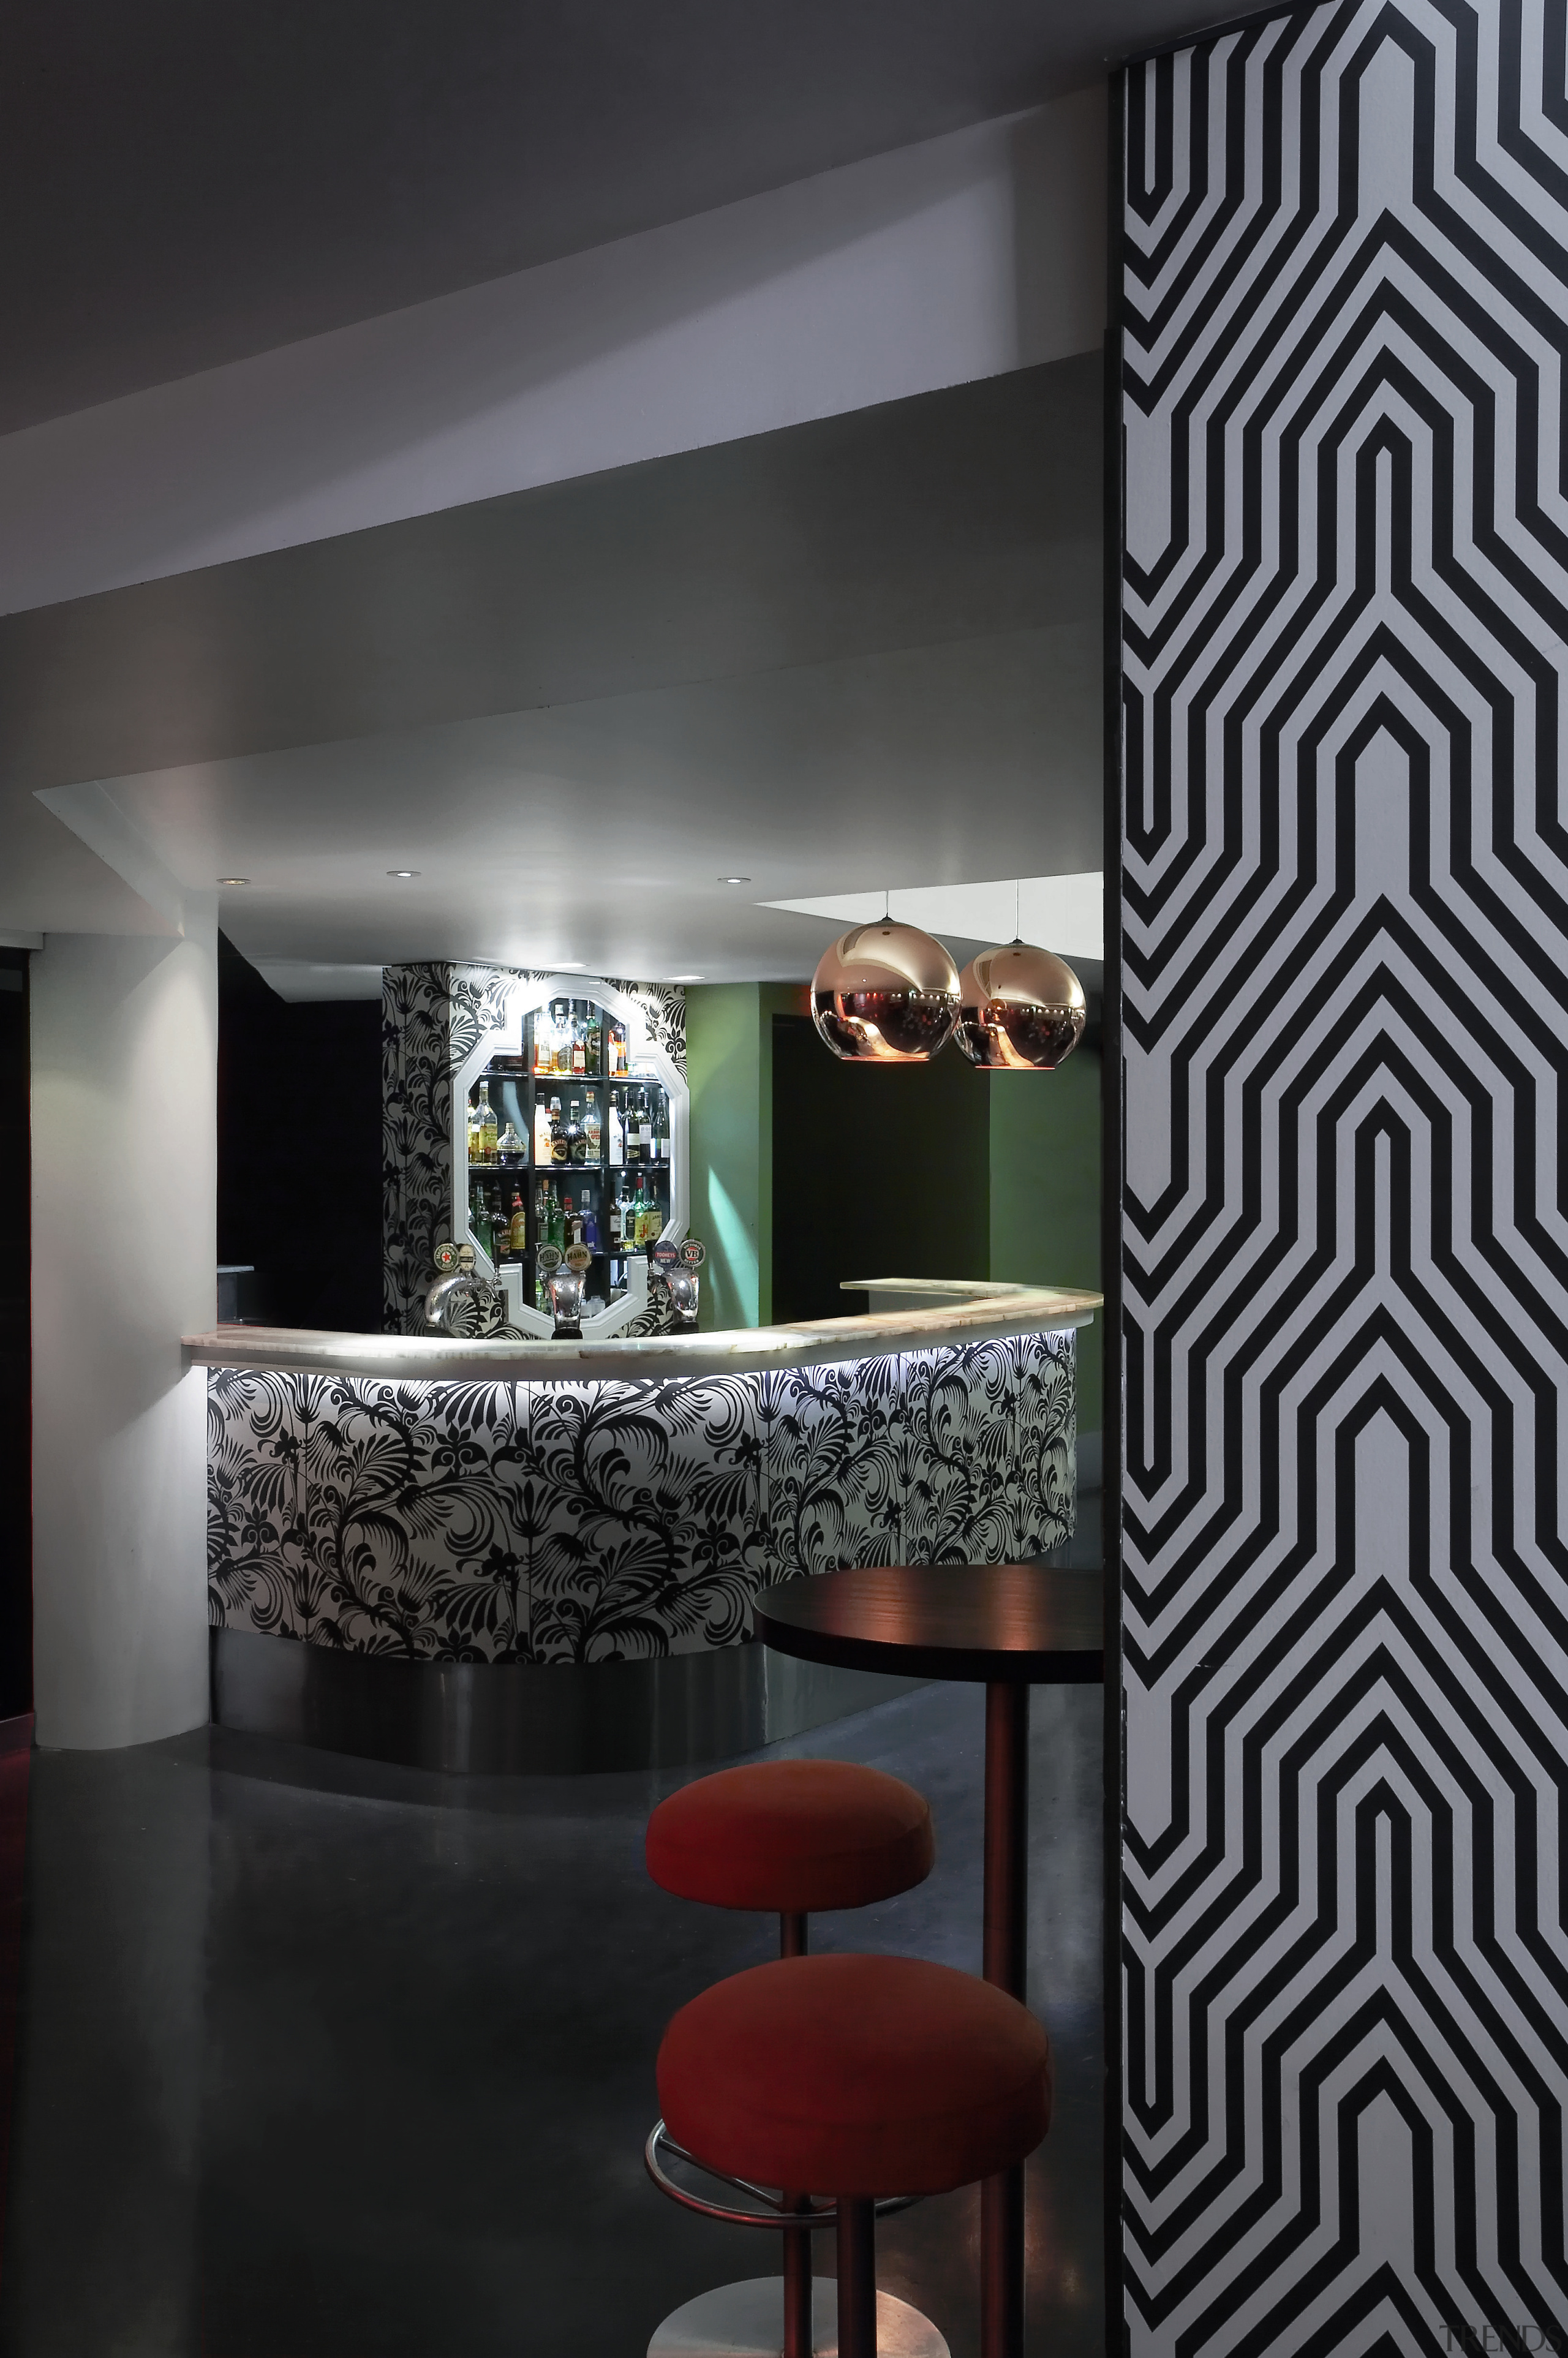 The entrance of the Hunter Bar incorporates three architecture, ceiling, design, glass, interior design, light fixture, wall, wallpaper, black, gray